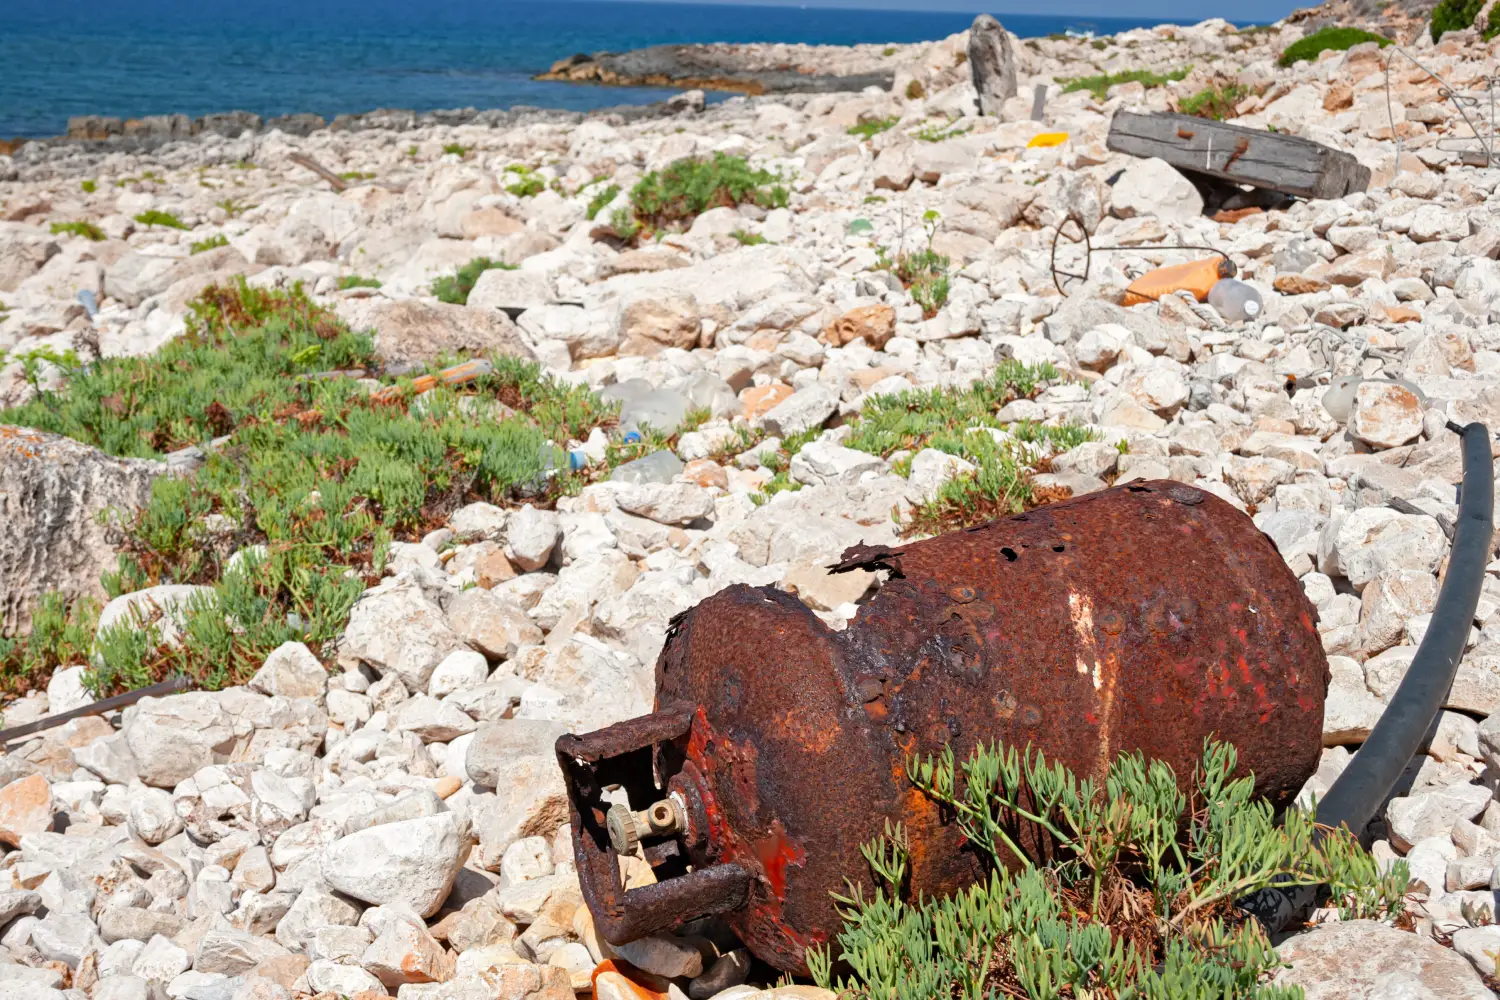 Ferry to Levanzo - Abandoned waste on the rocky coast of the island of Levanzo in Sicily, Italy.